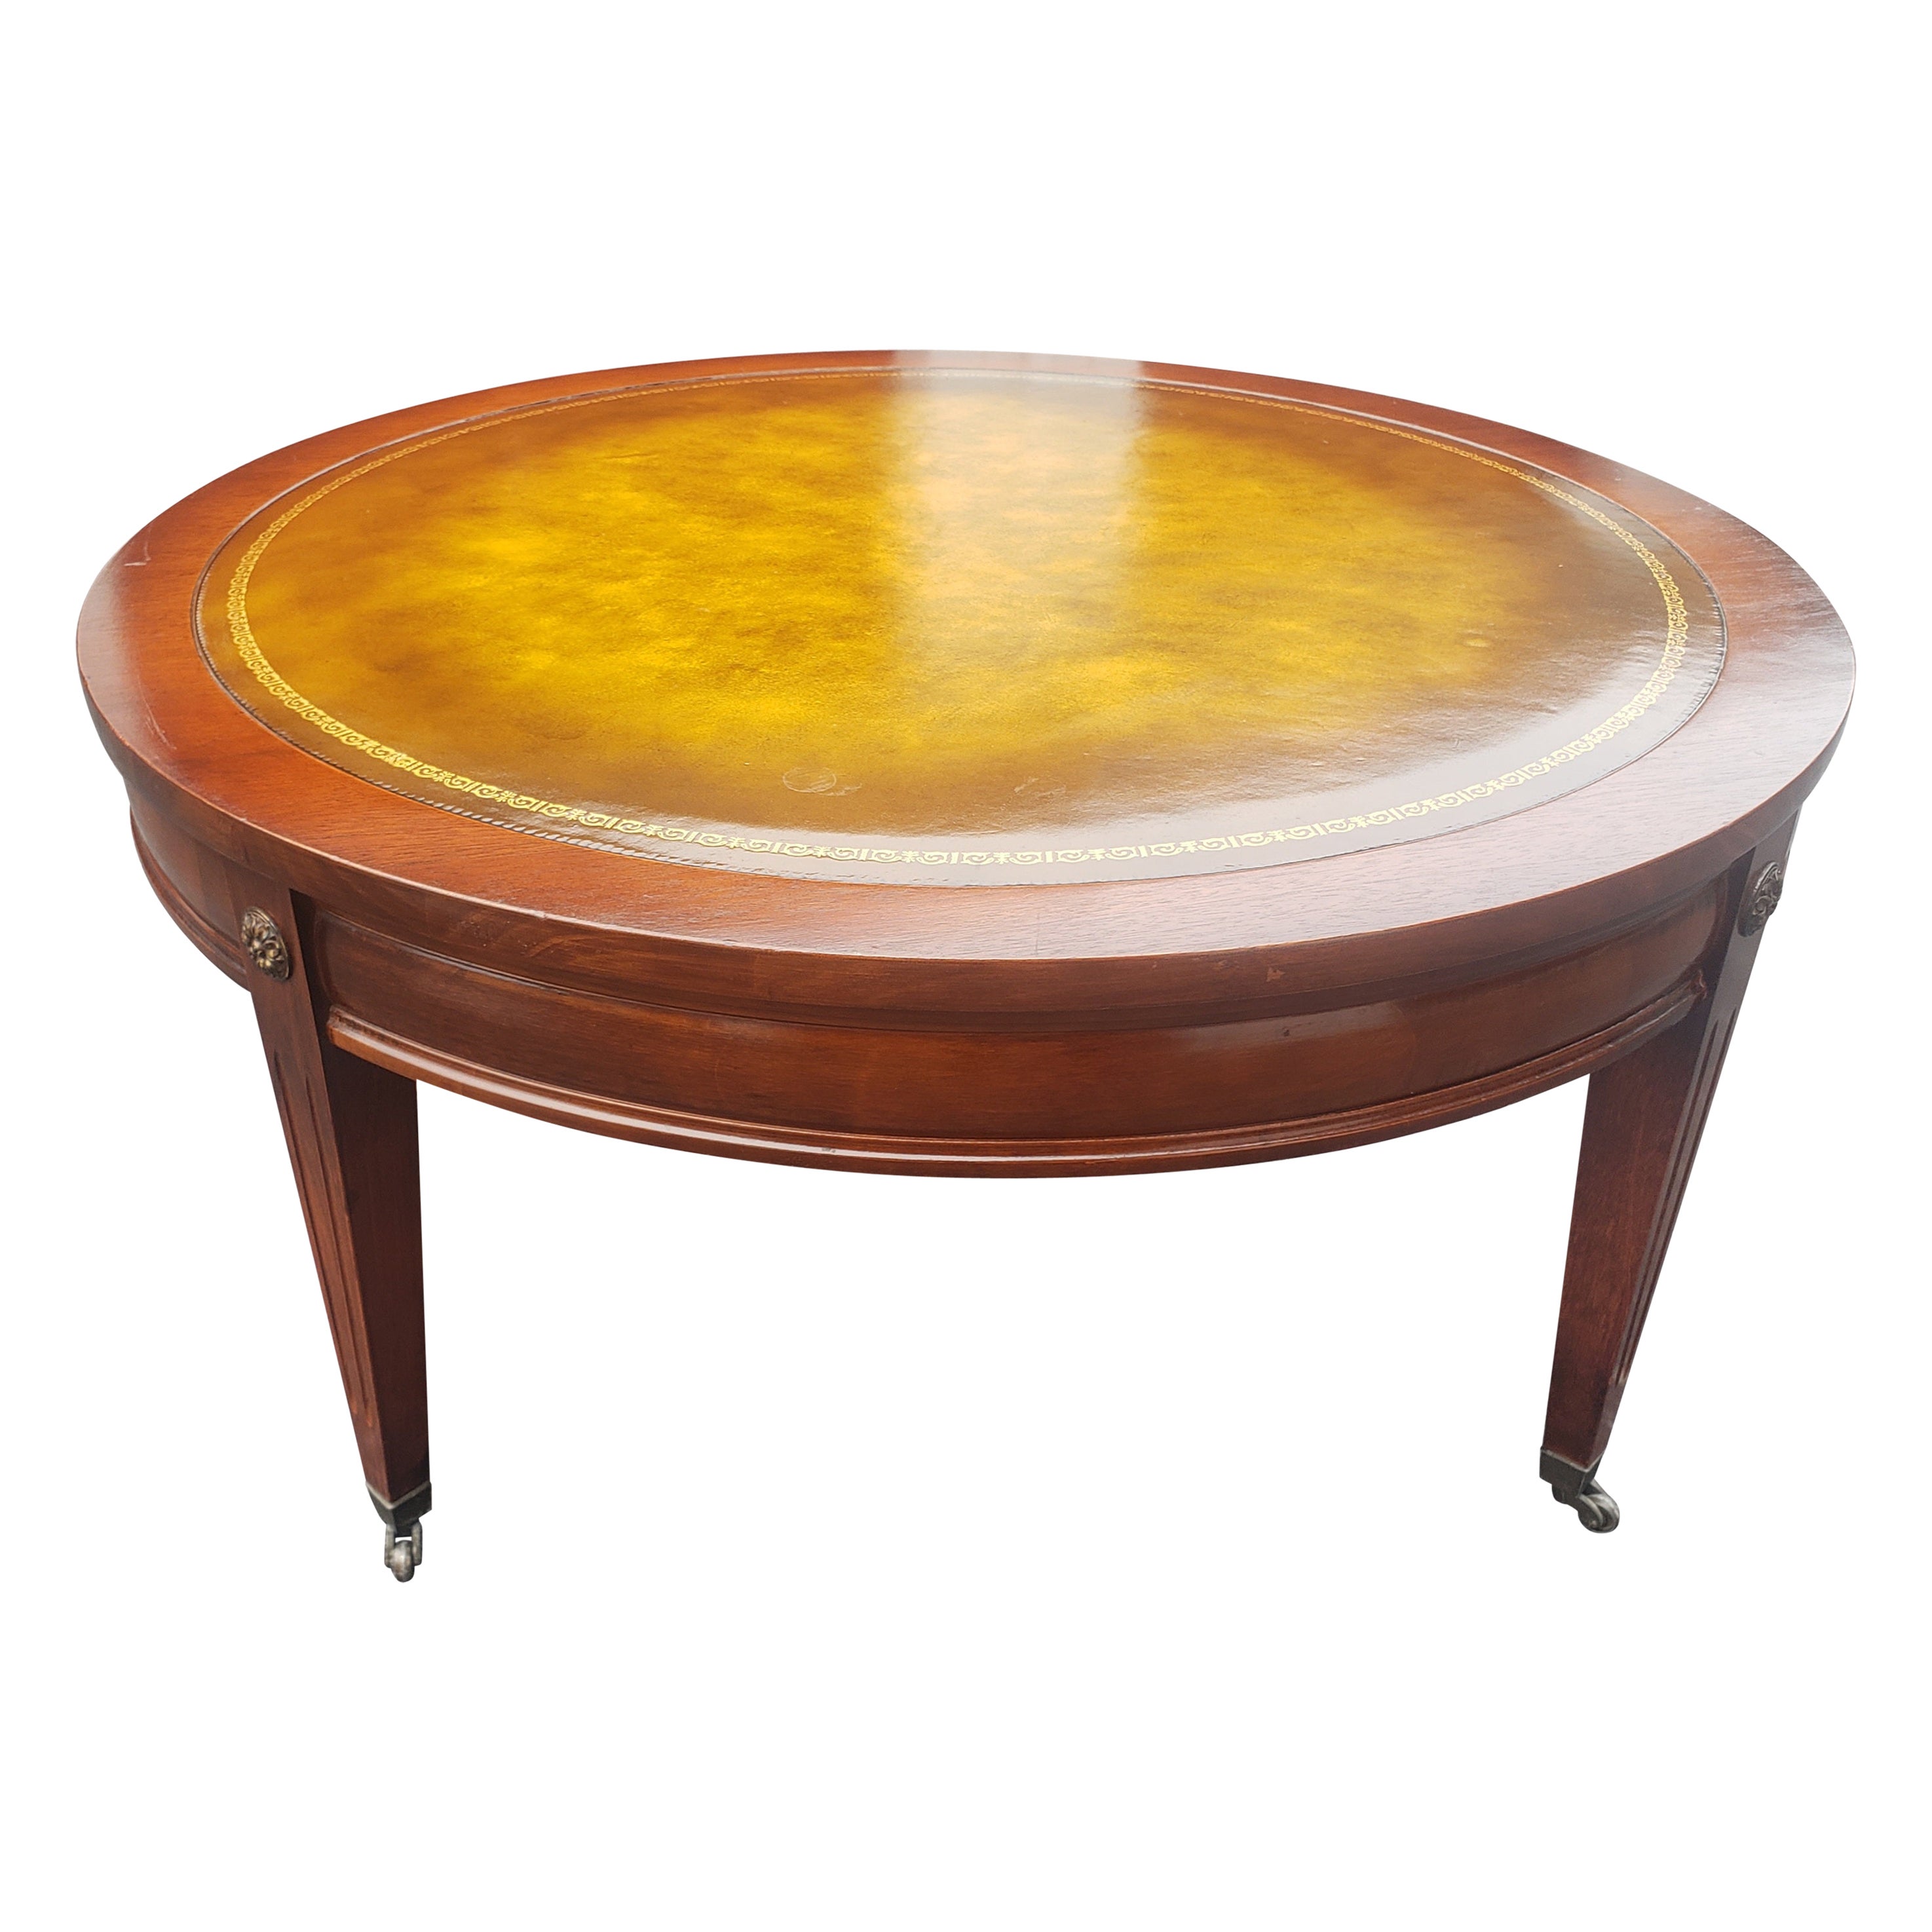 MId-Century Mahogany with Stenciled Tooled Leather Top Cocktail Table For Sale